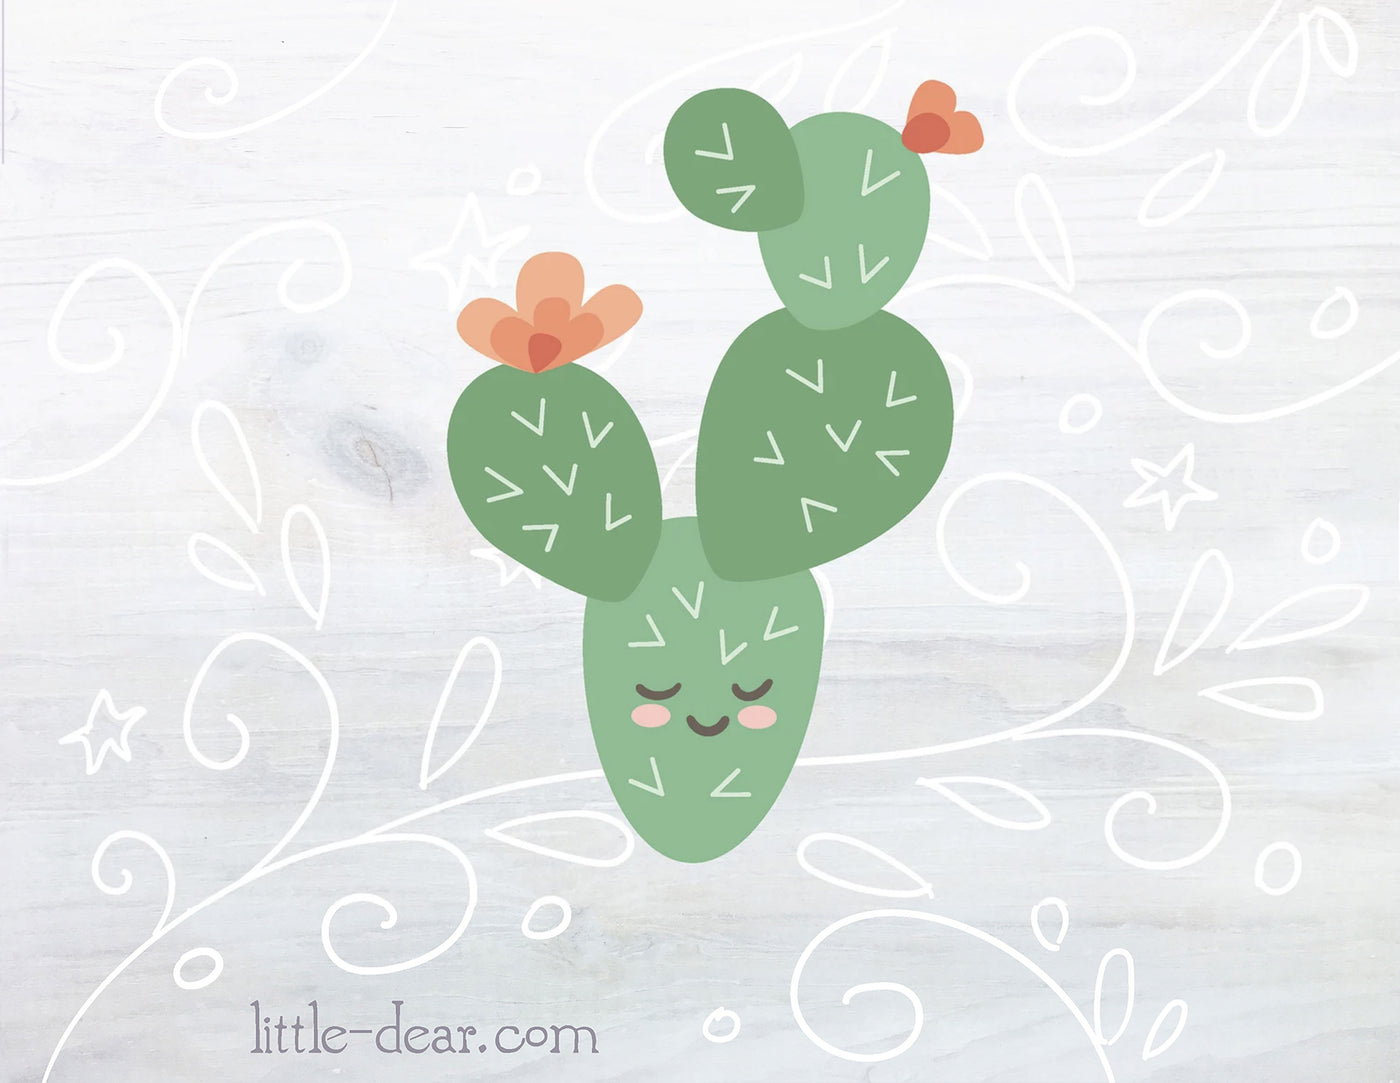 SVG Prickly Pear Cactus 1 cut file for Cricut, Silhouette, PNG, JPG